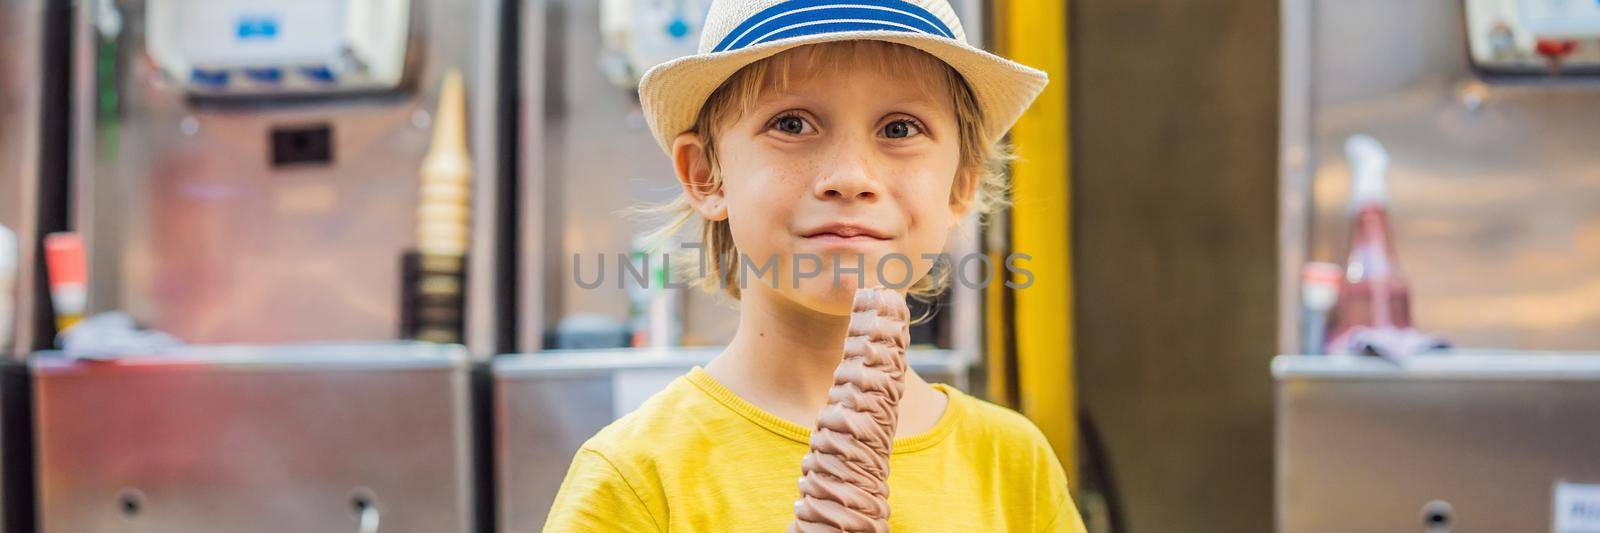 Little tourist boy eating 32 cm ice cream. 1 foot long ice cream. Long ice cream is a popular tourist attraction in Korea. Travel to Korea concept. Traveling with children concept BANNER, LONG FORMAT by galitskaya